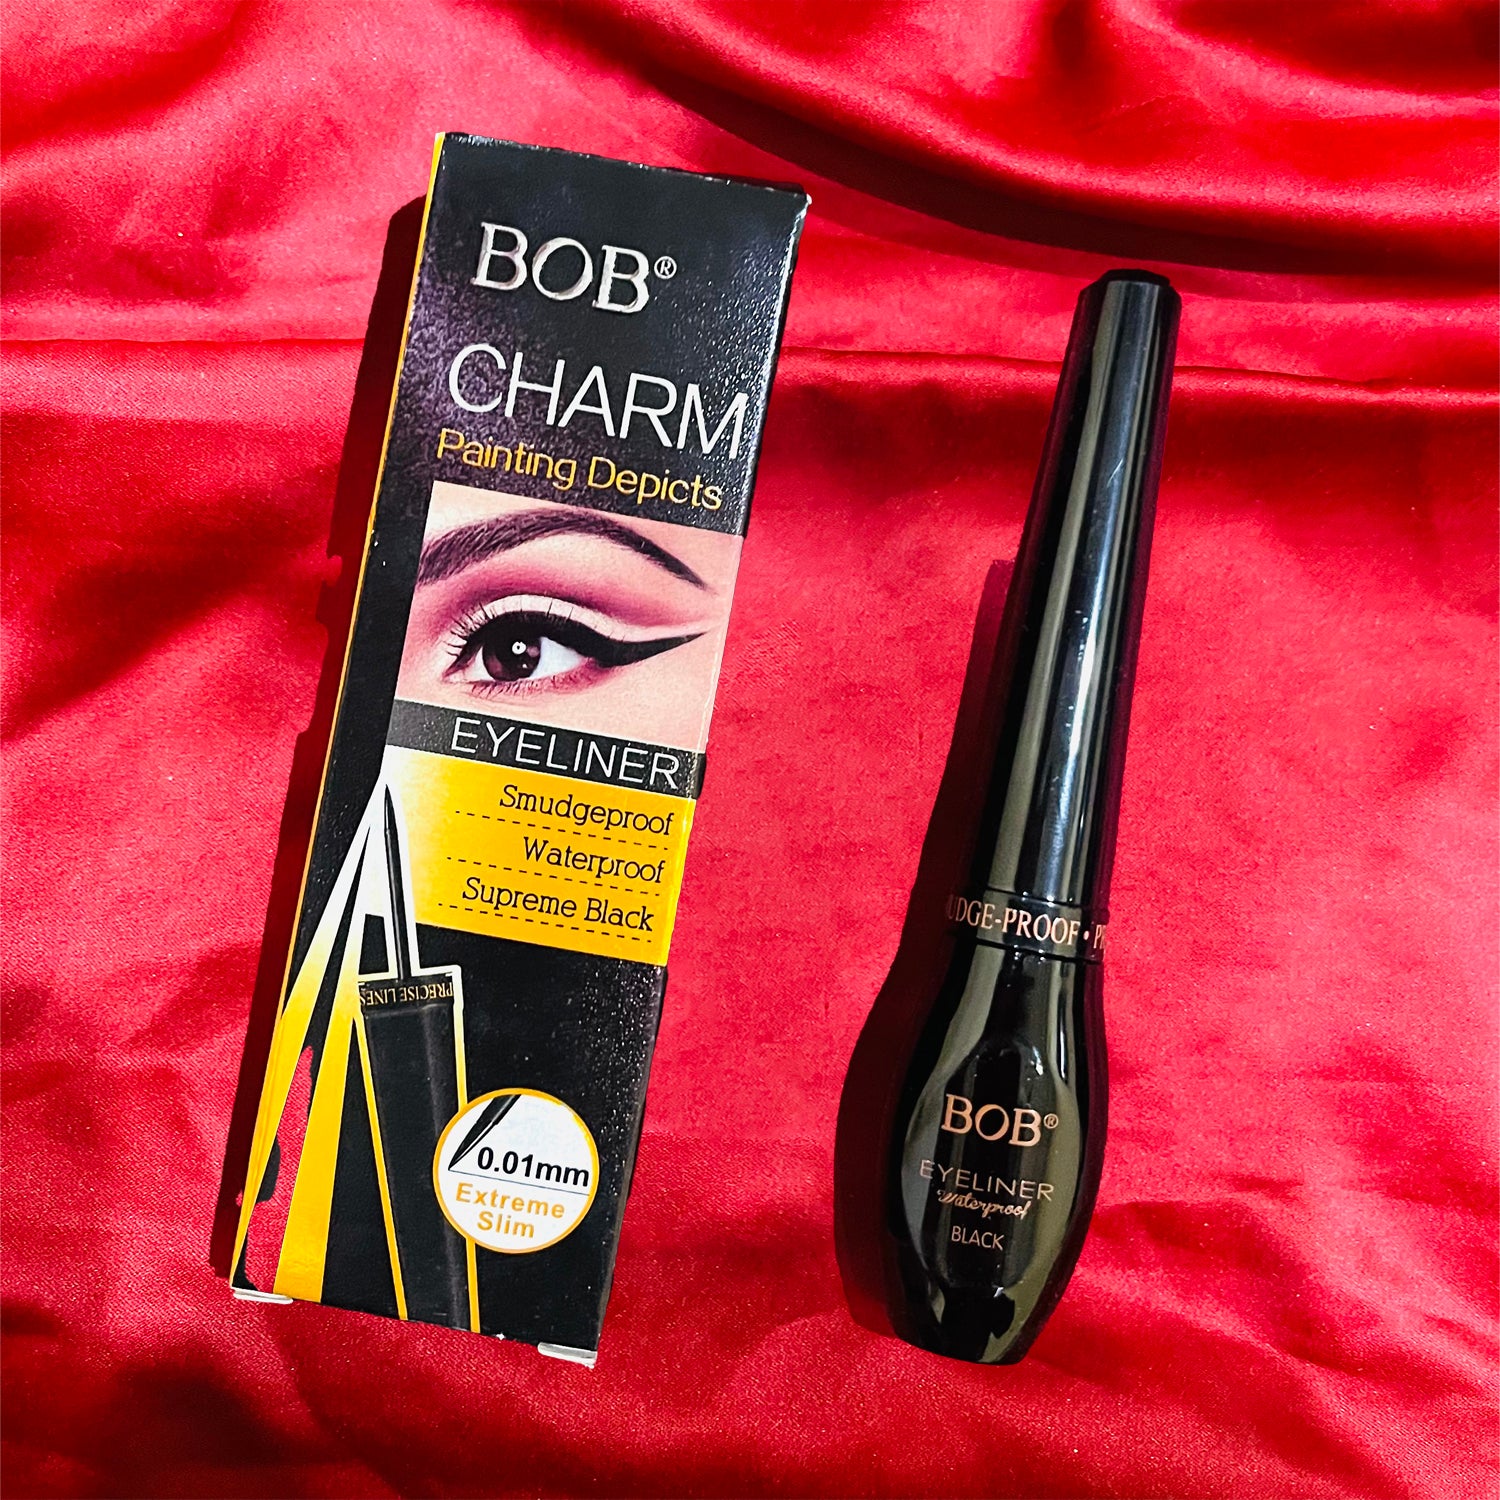 BOB CHARM Painting Depicts Eyeliner